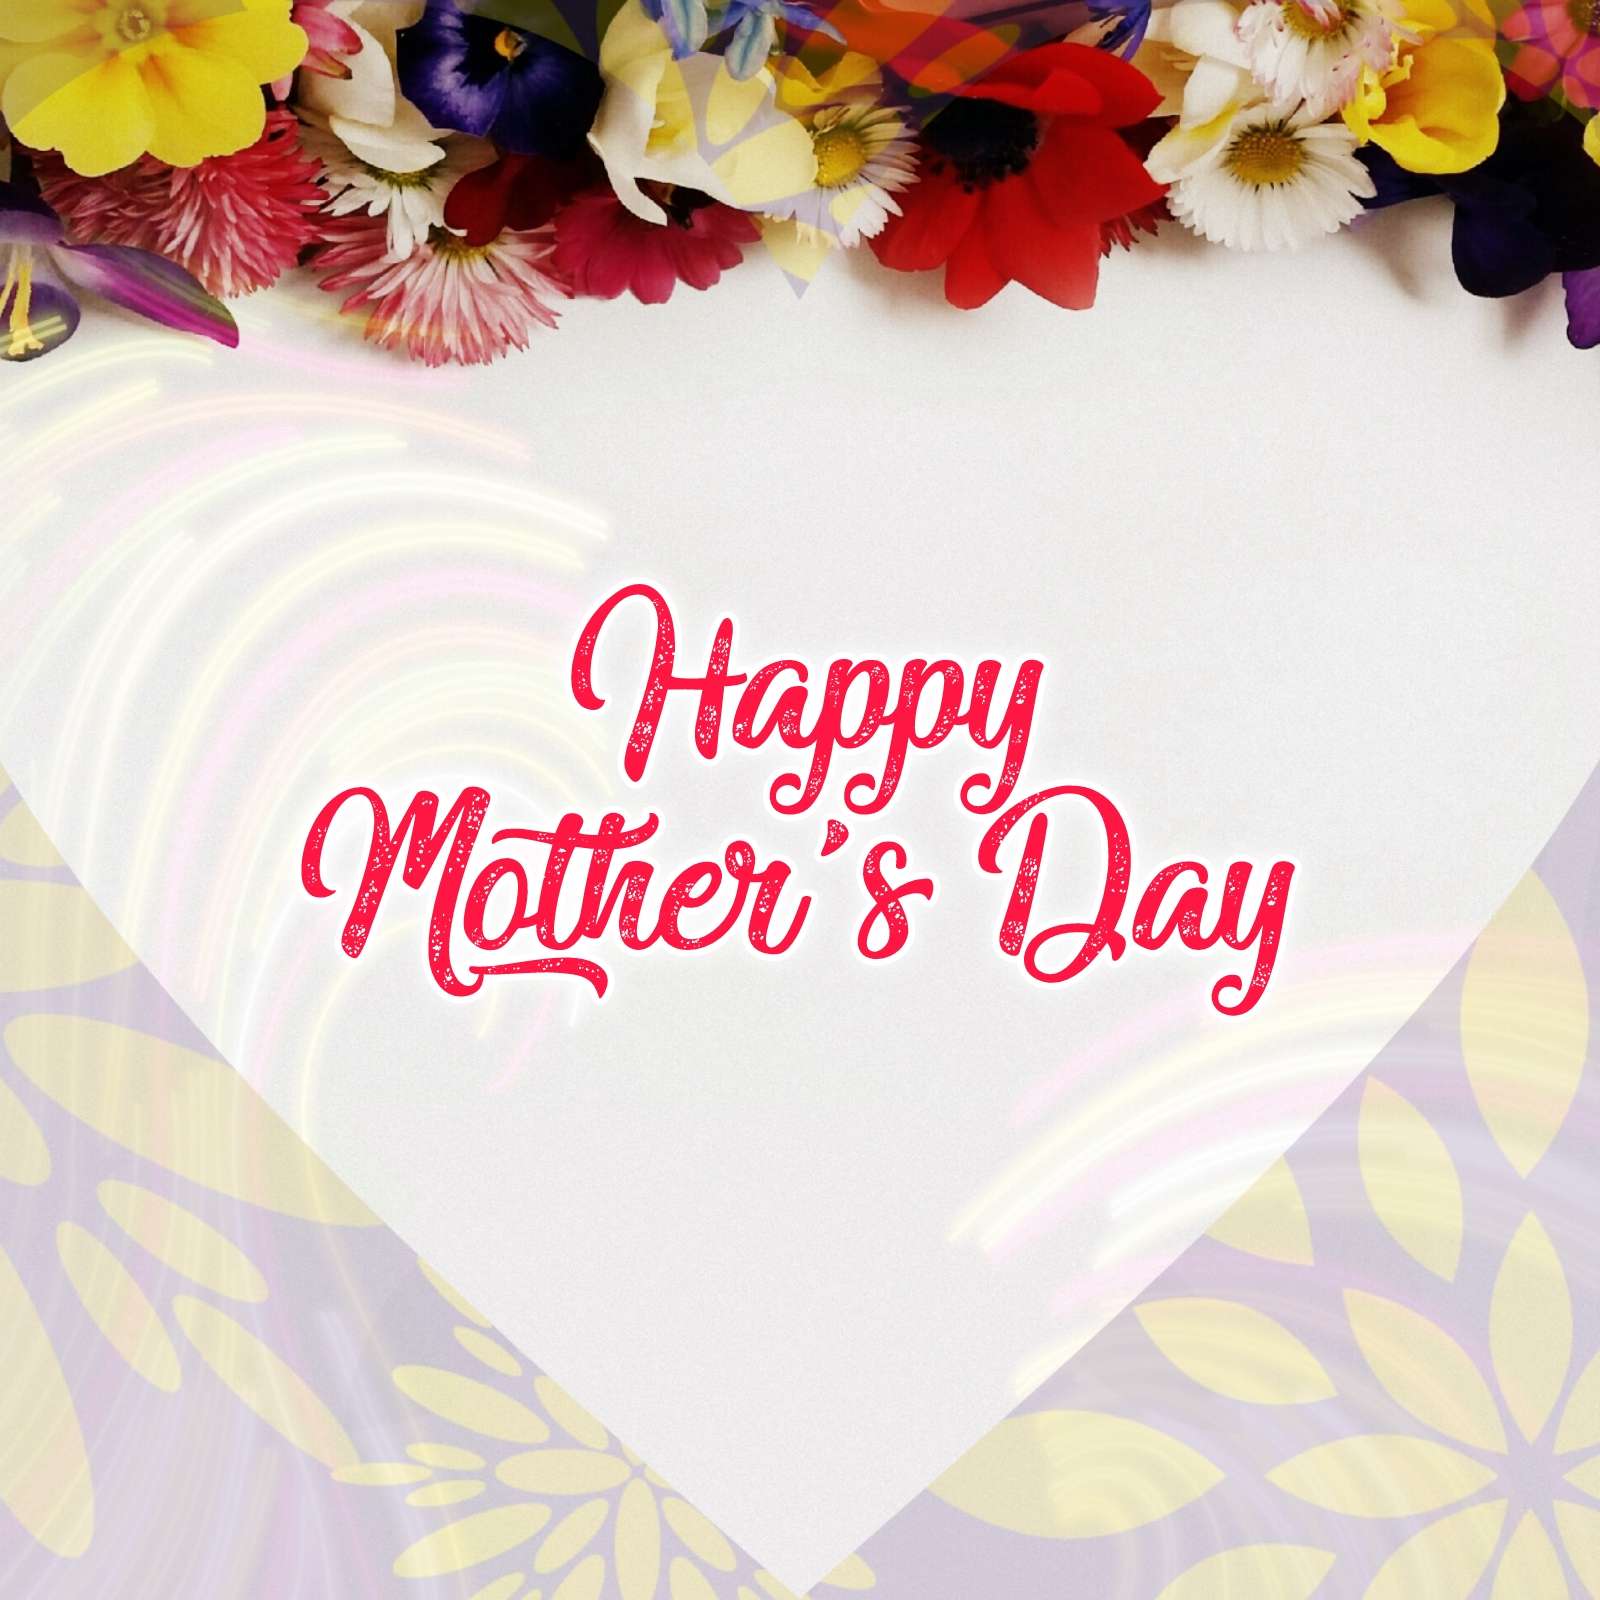 Floral happy mothers day lettering card designed for special occasion  celebration of mothers day 2K wallpaper download